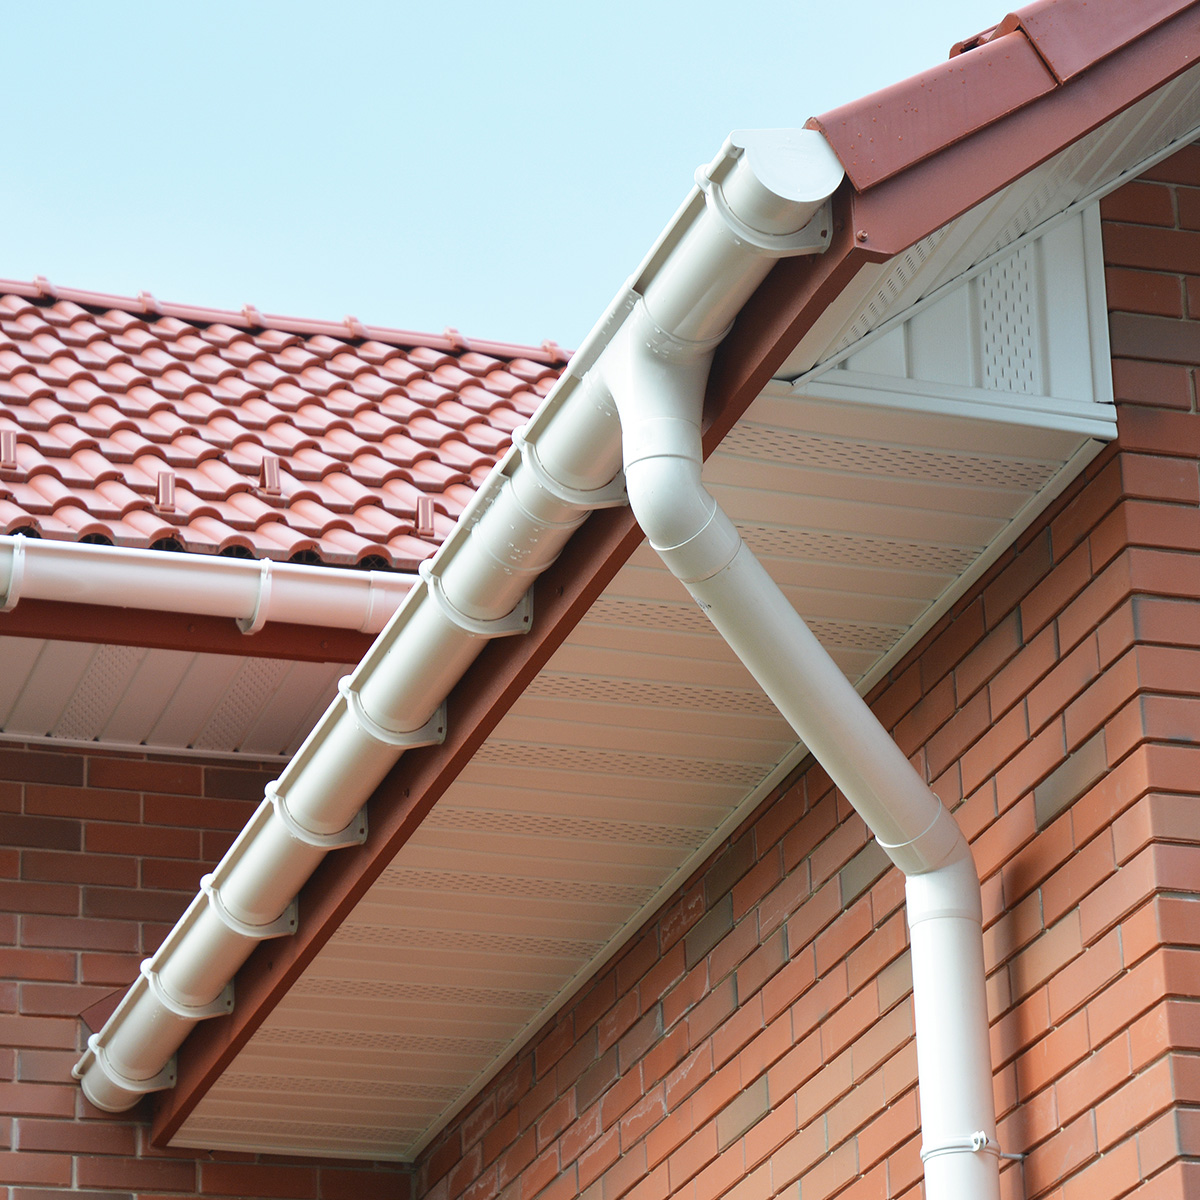 Rain gutter and a downspout